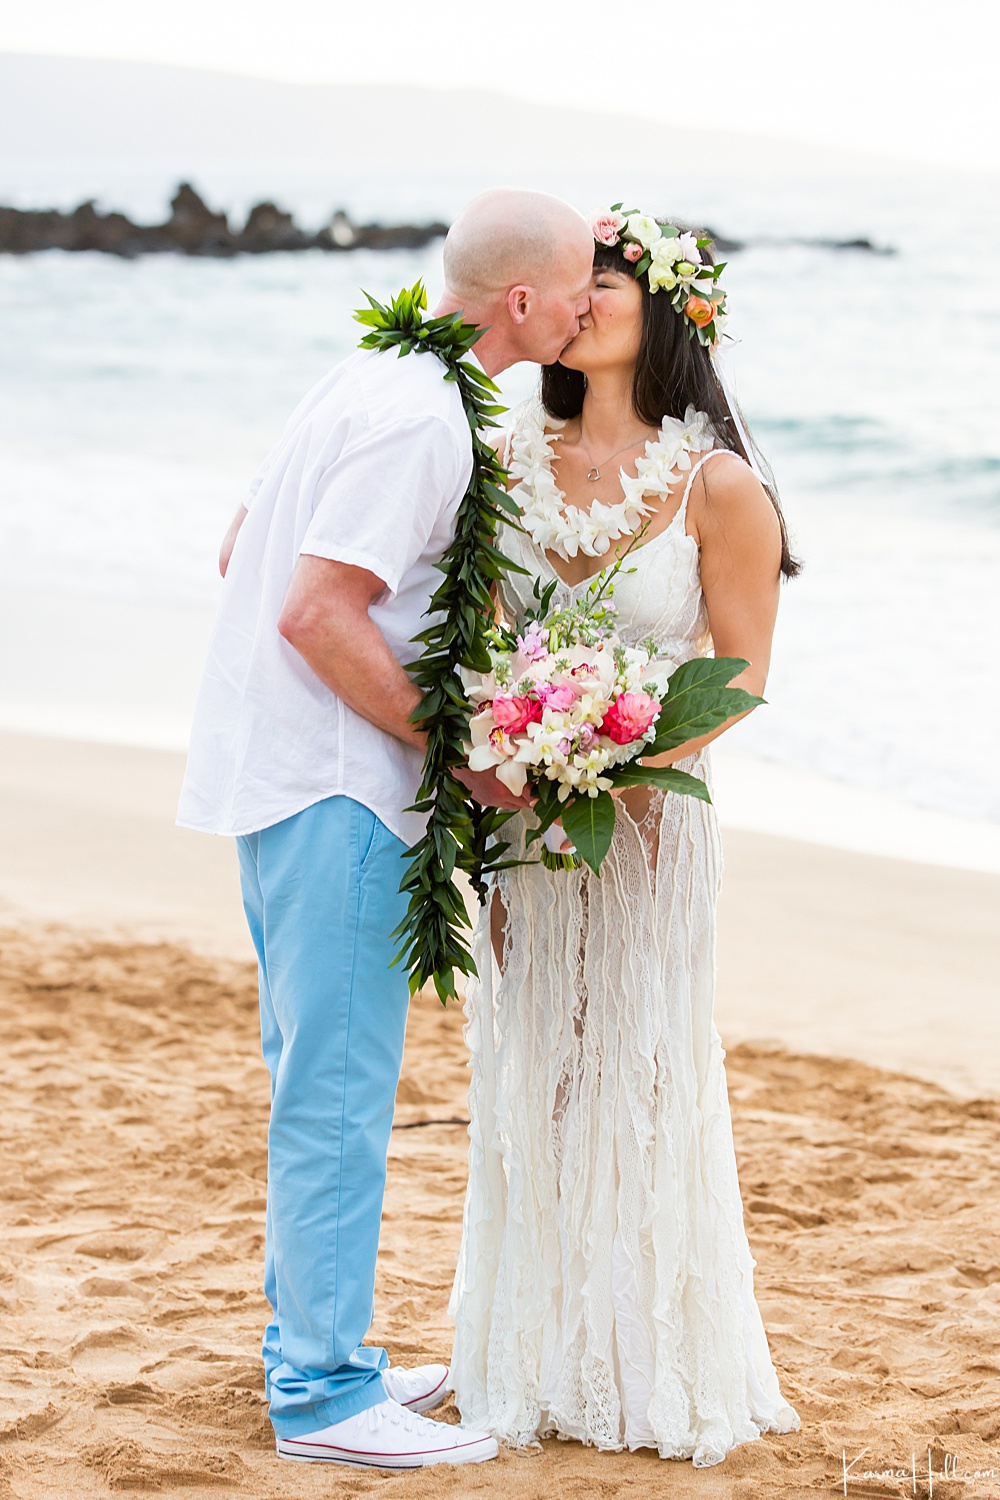 From Clouds to Golden Skies - Marian & Timothy's Beach Wedding in Maui